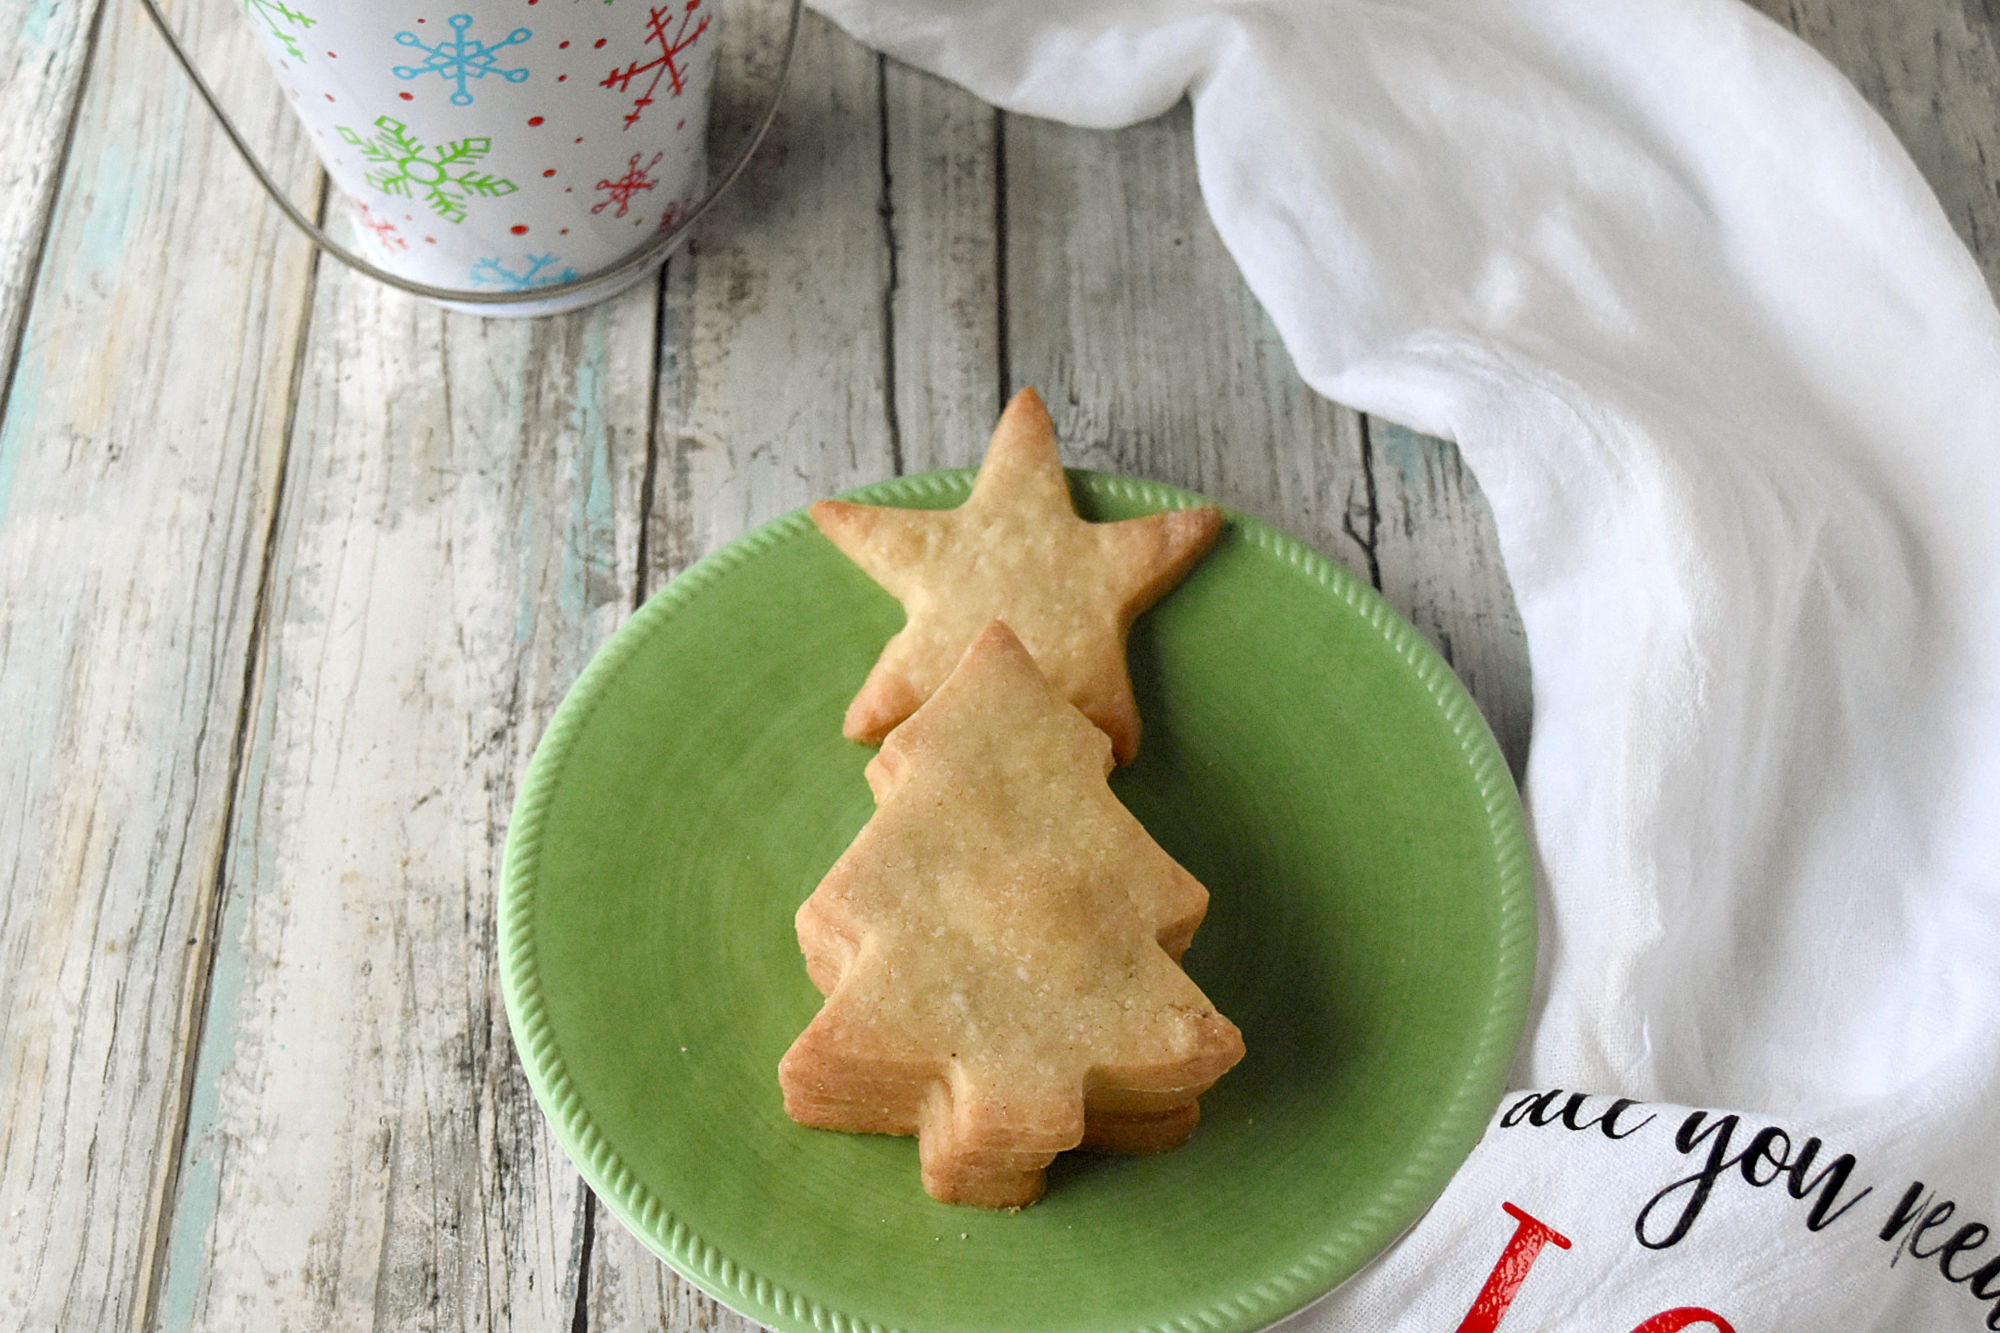 Cardamom Shortbread Cookies are tender, flaky, and have a delicious cardamom flavor with a hint of cinnamon.  If you really like cardamom, then you’ll love these cookies. #ChristmasCookies #shortbreadcookies #cardamom #cutoutcookies